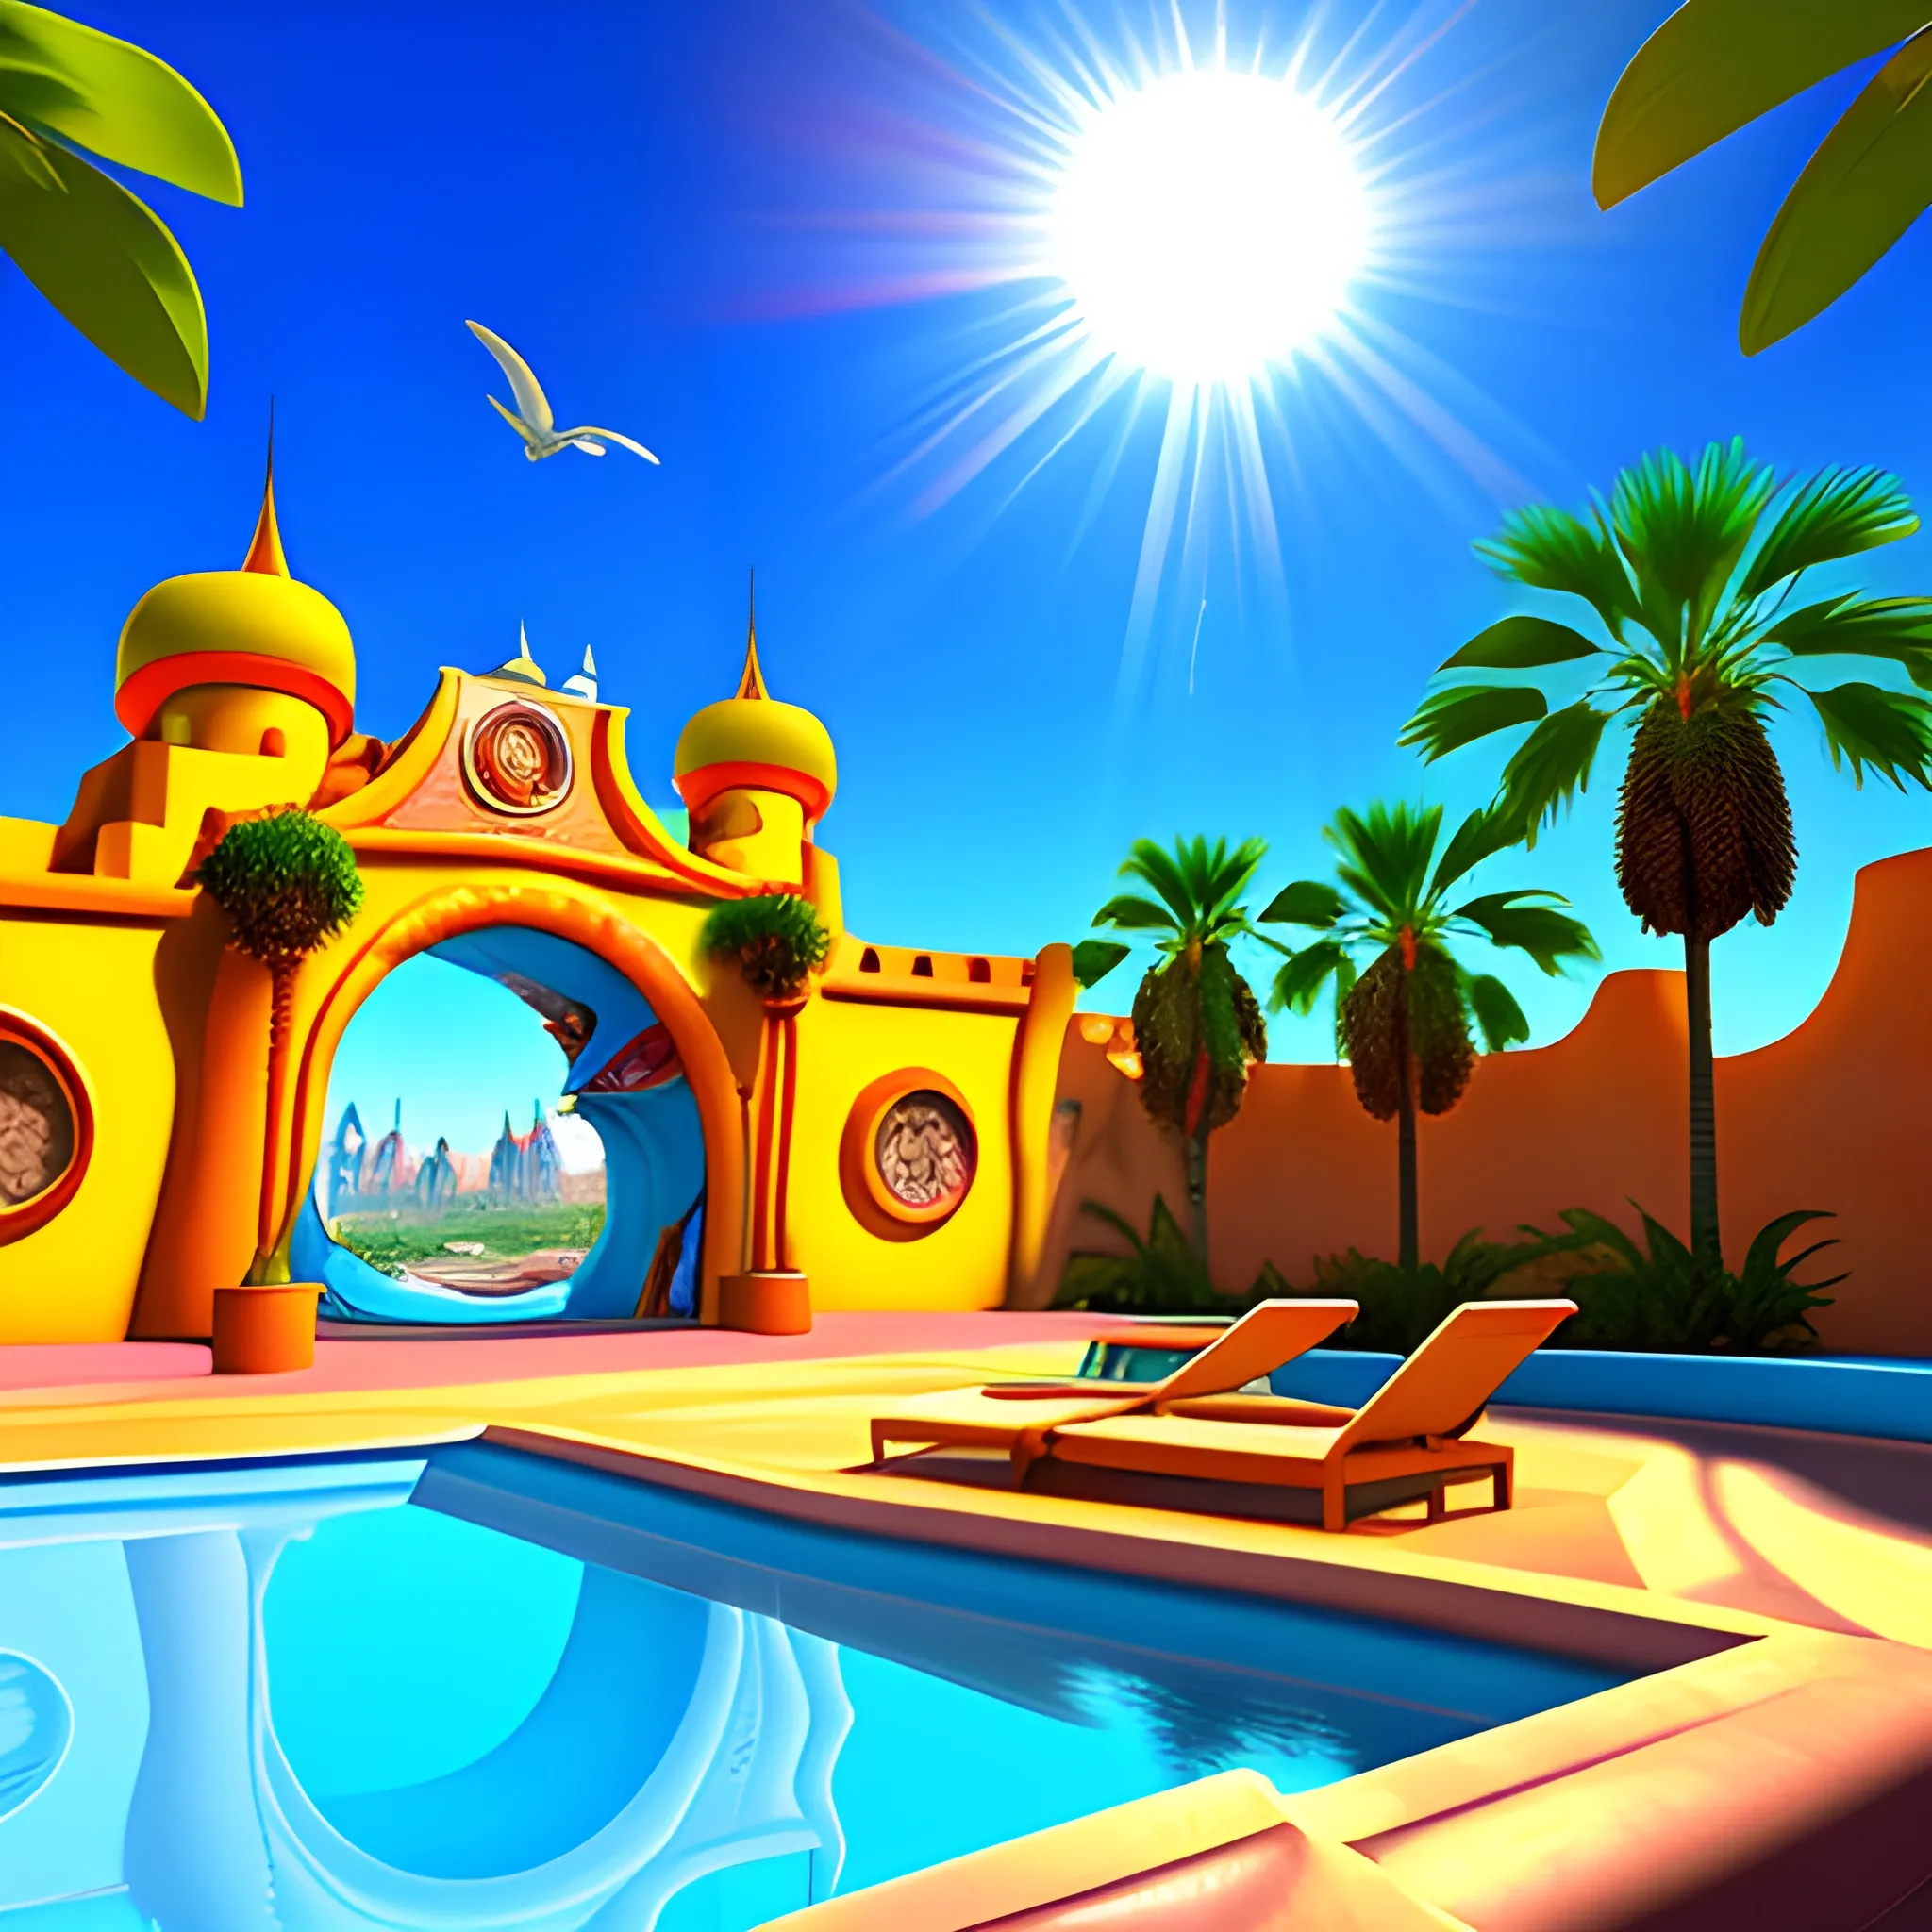 3d Disney animation, mexican kid, weather sun, pool